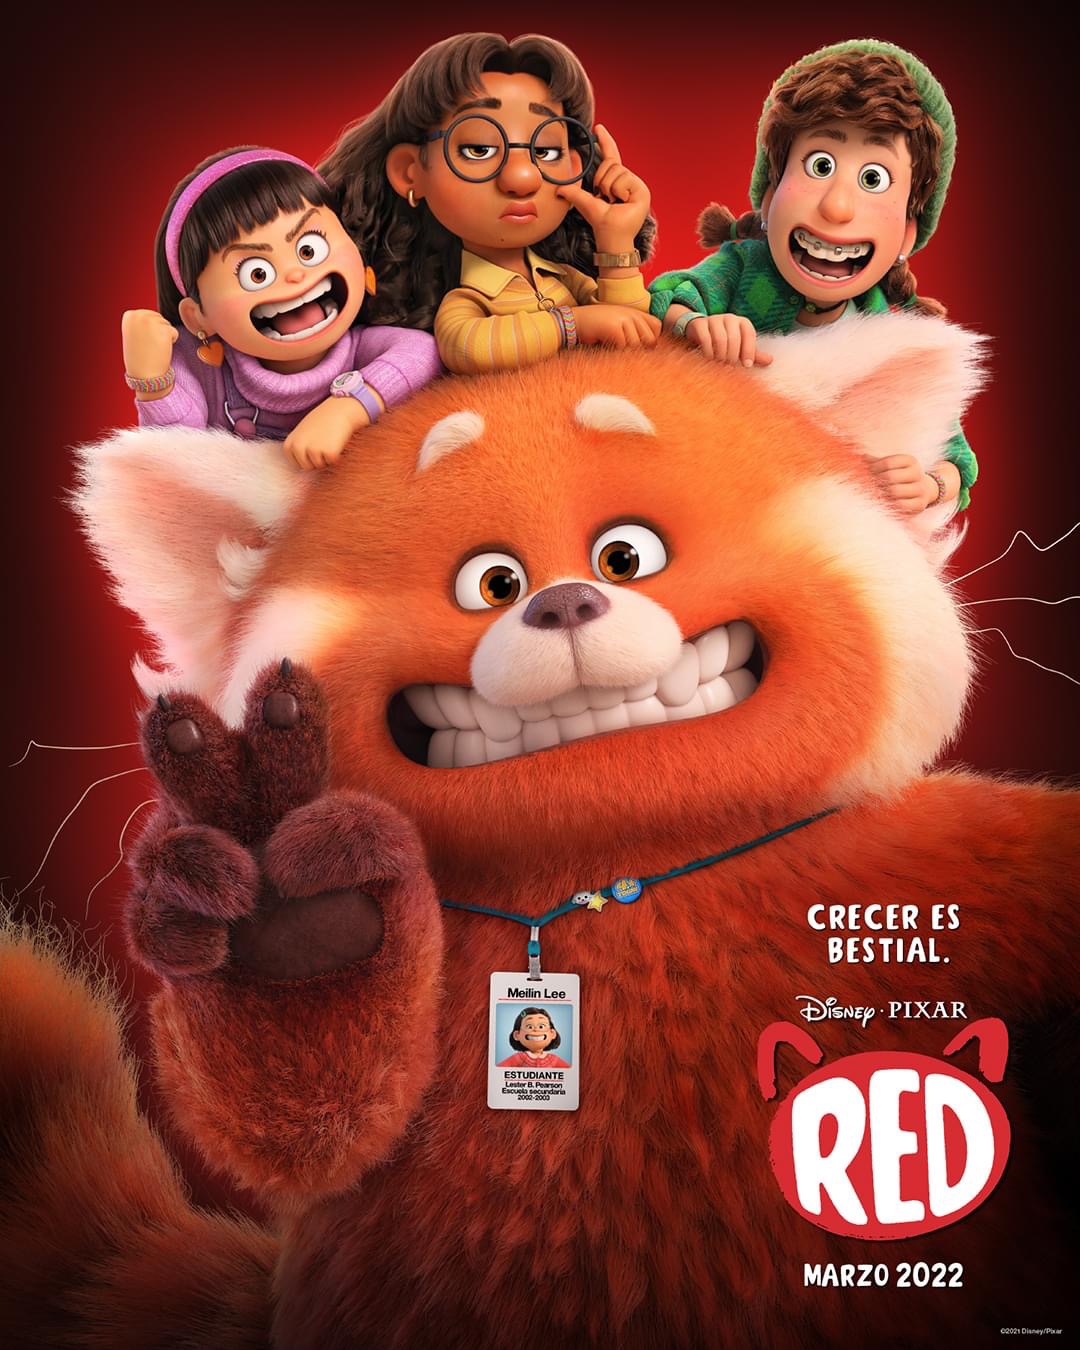 Turning Red - trailer of the cutest Pixar film ever 